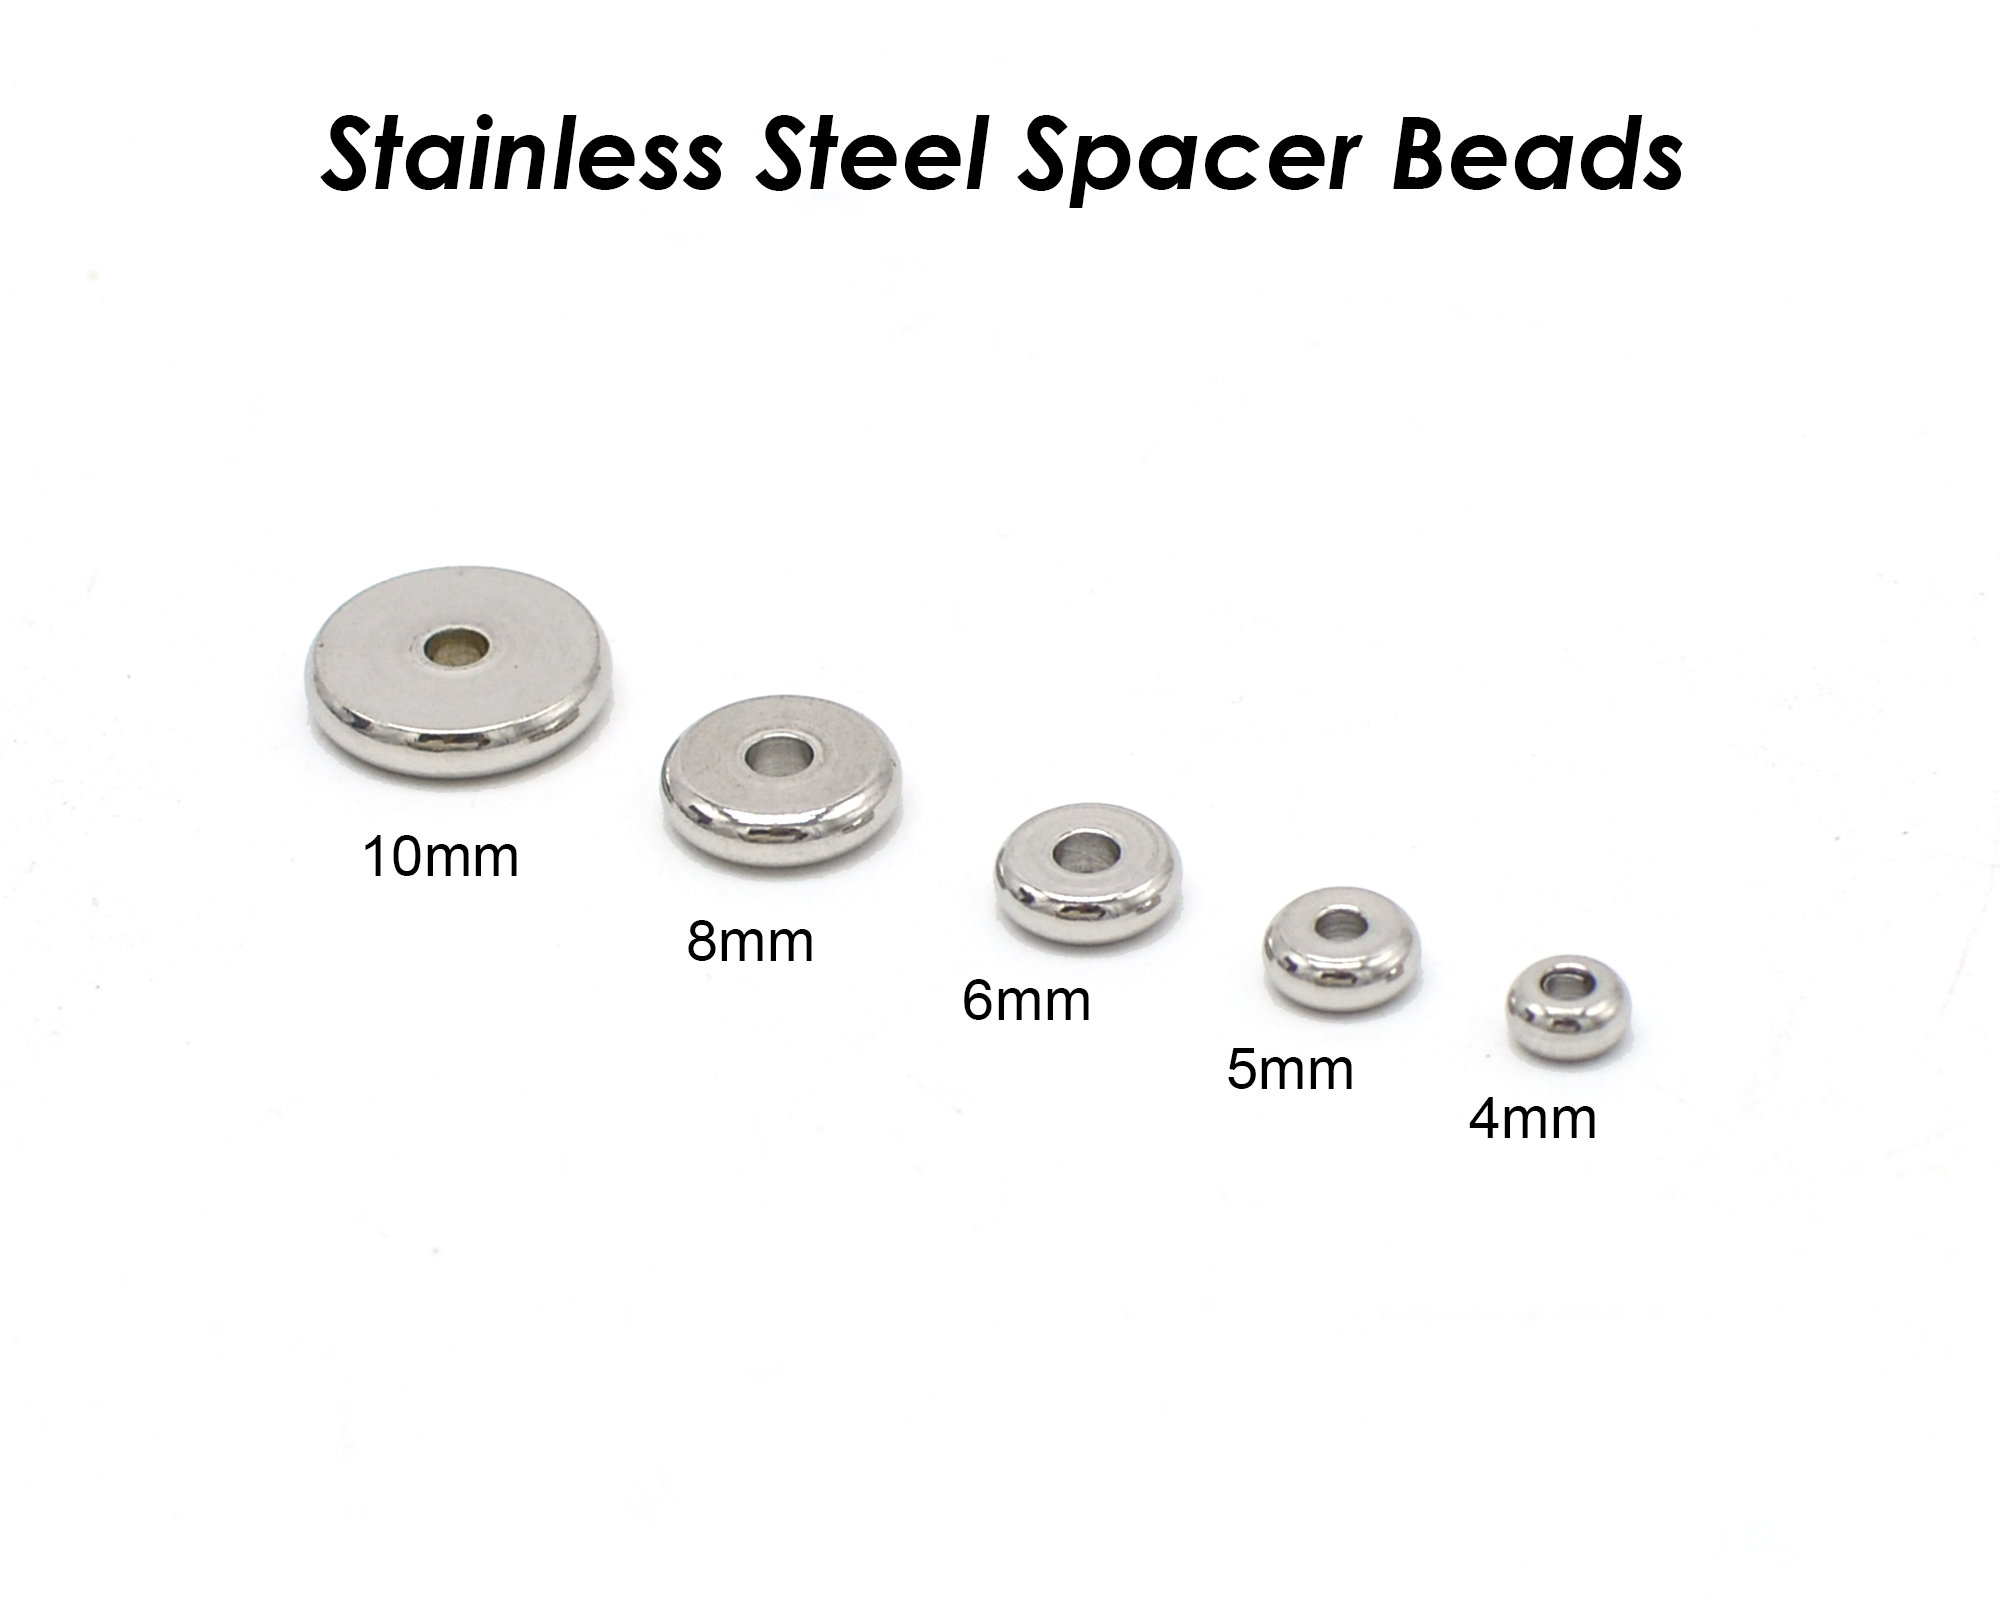 100pcs 8mm Disc Spacer Beads Stainless Steel Loose Beads 2mm Hole